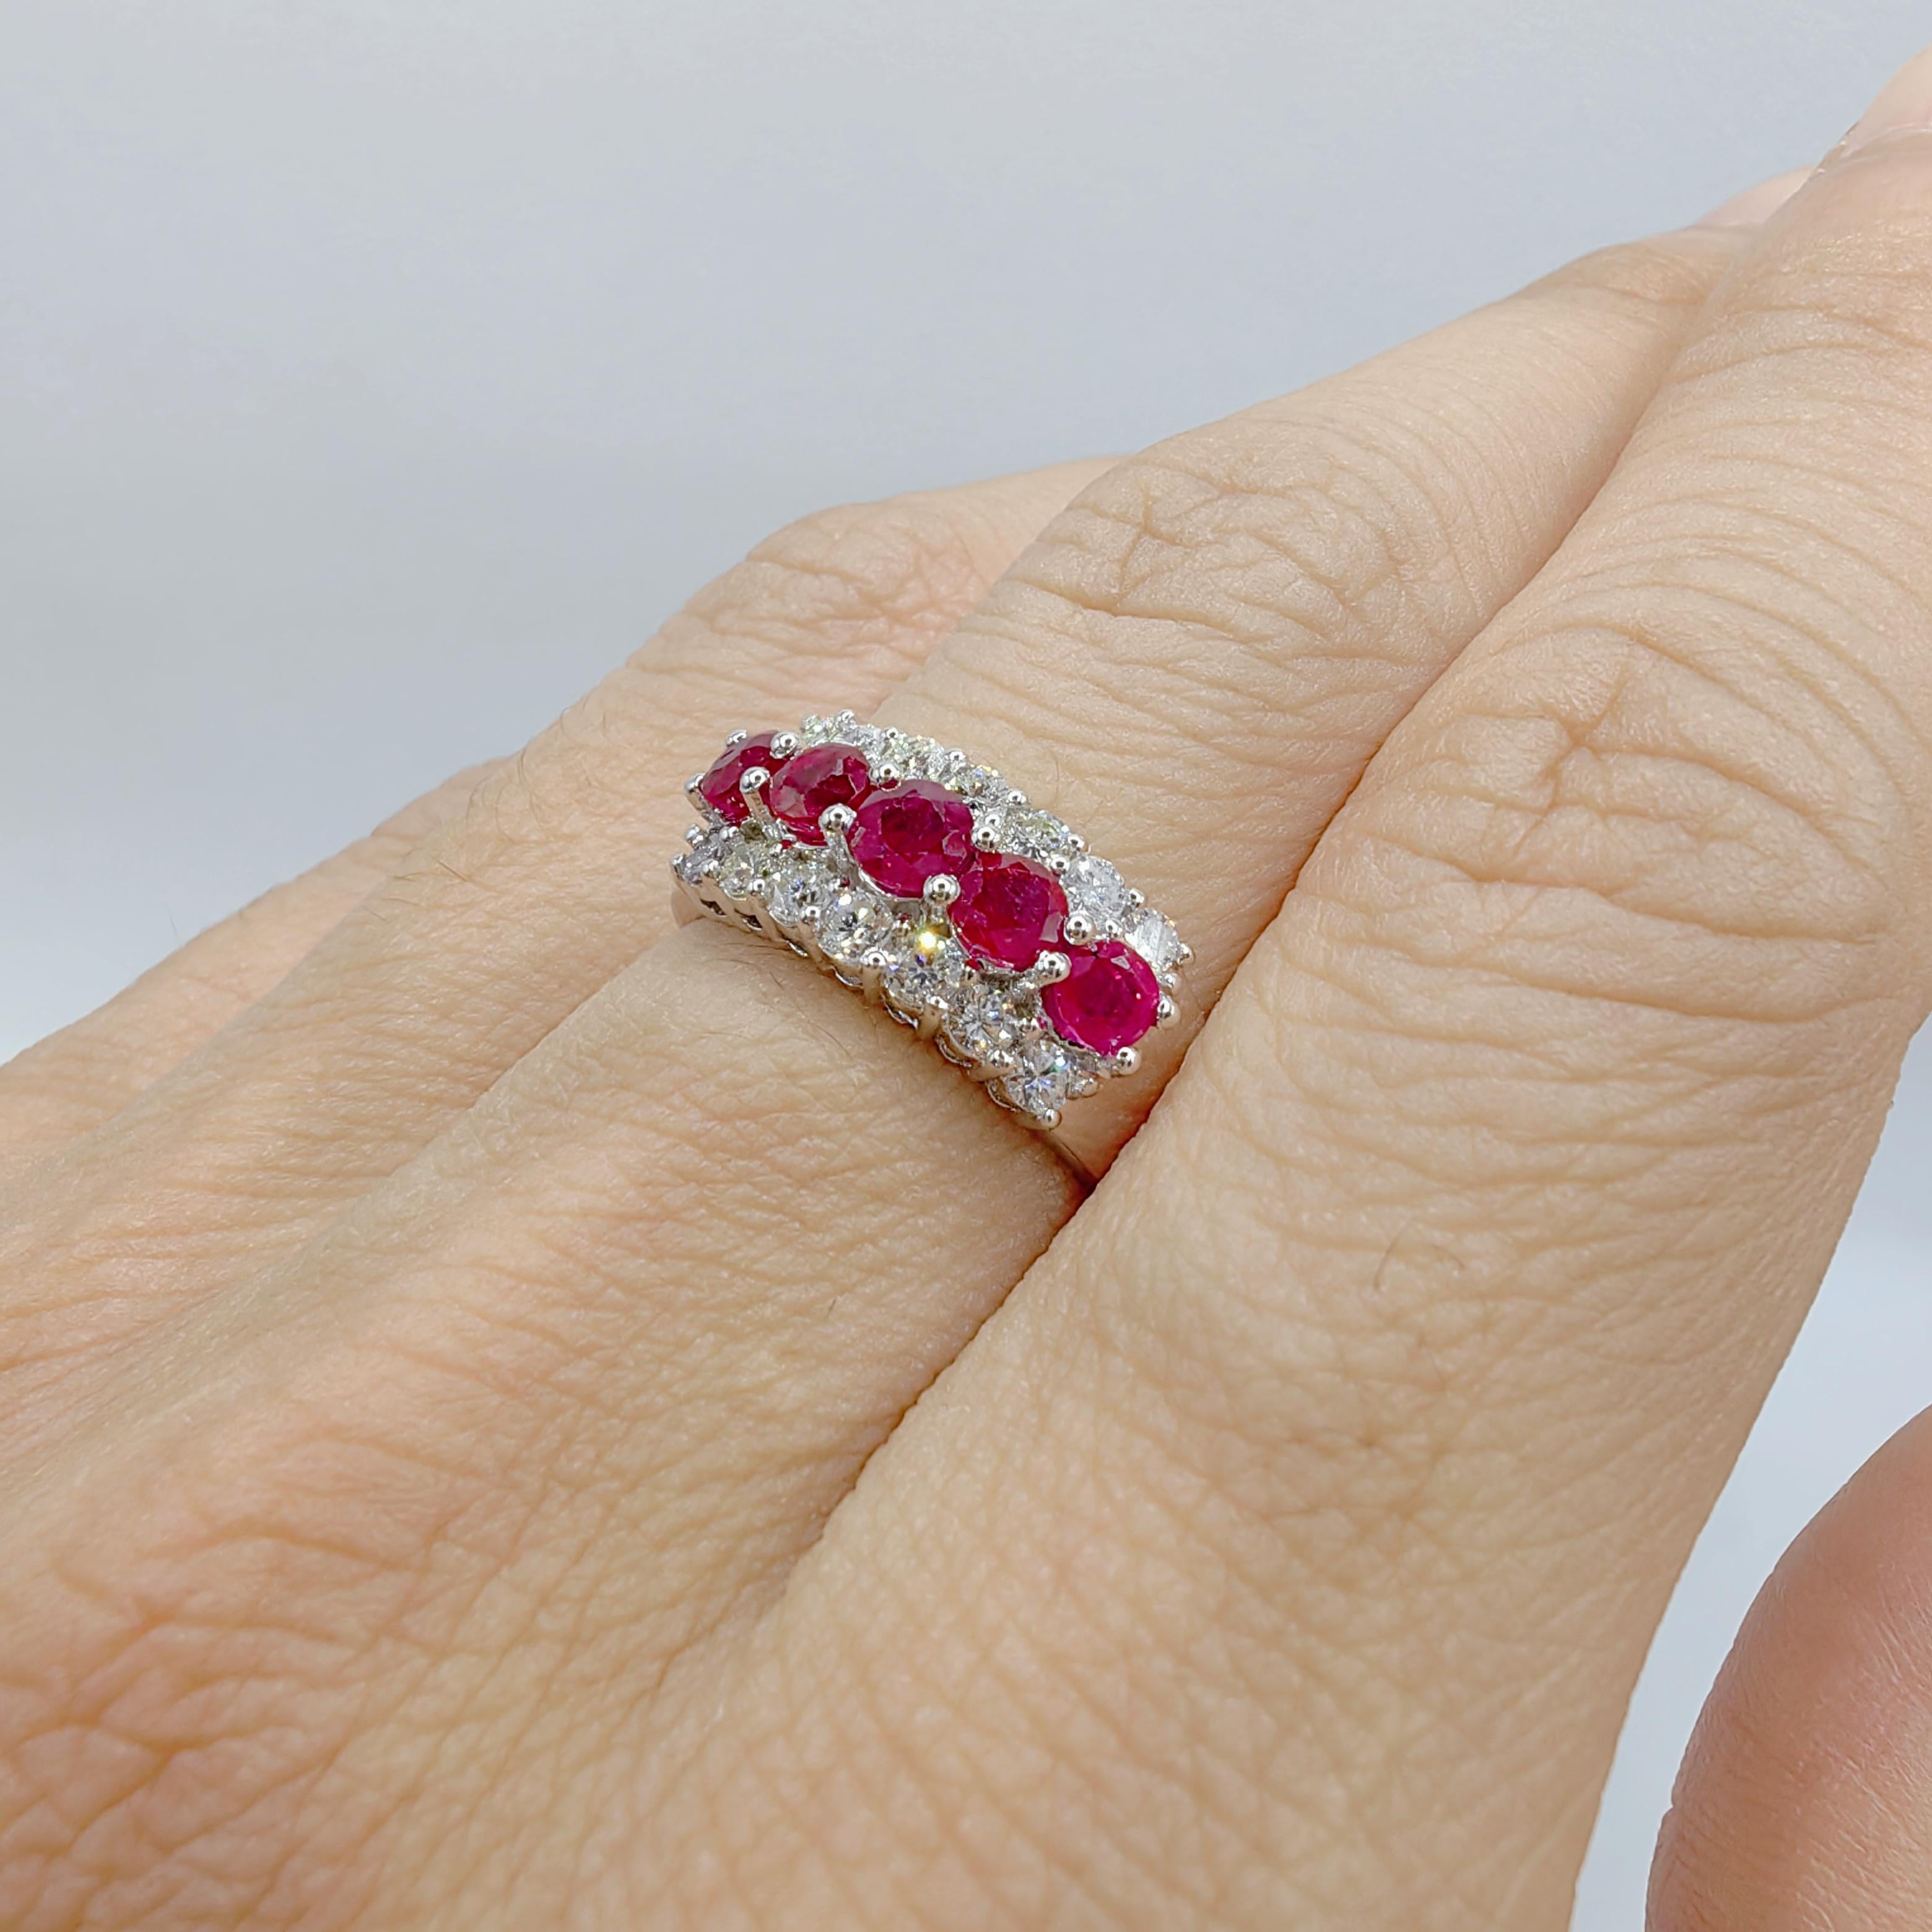 1.32 Carat Pigeon Blood Ruby & Diamond Half Eternity Ring in 18K White Gold For Sale 1